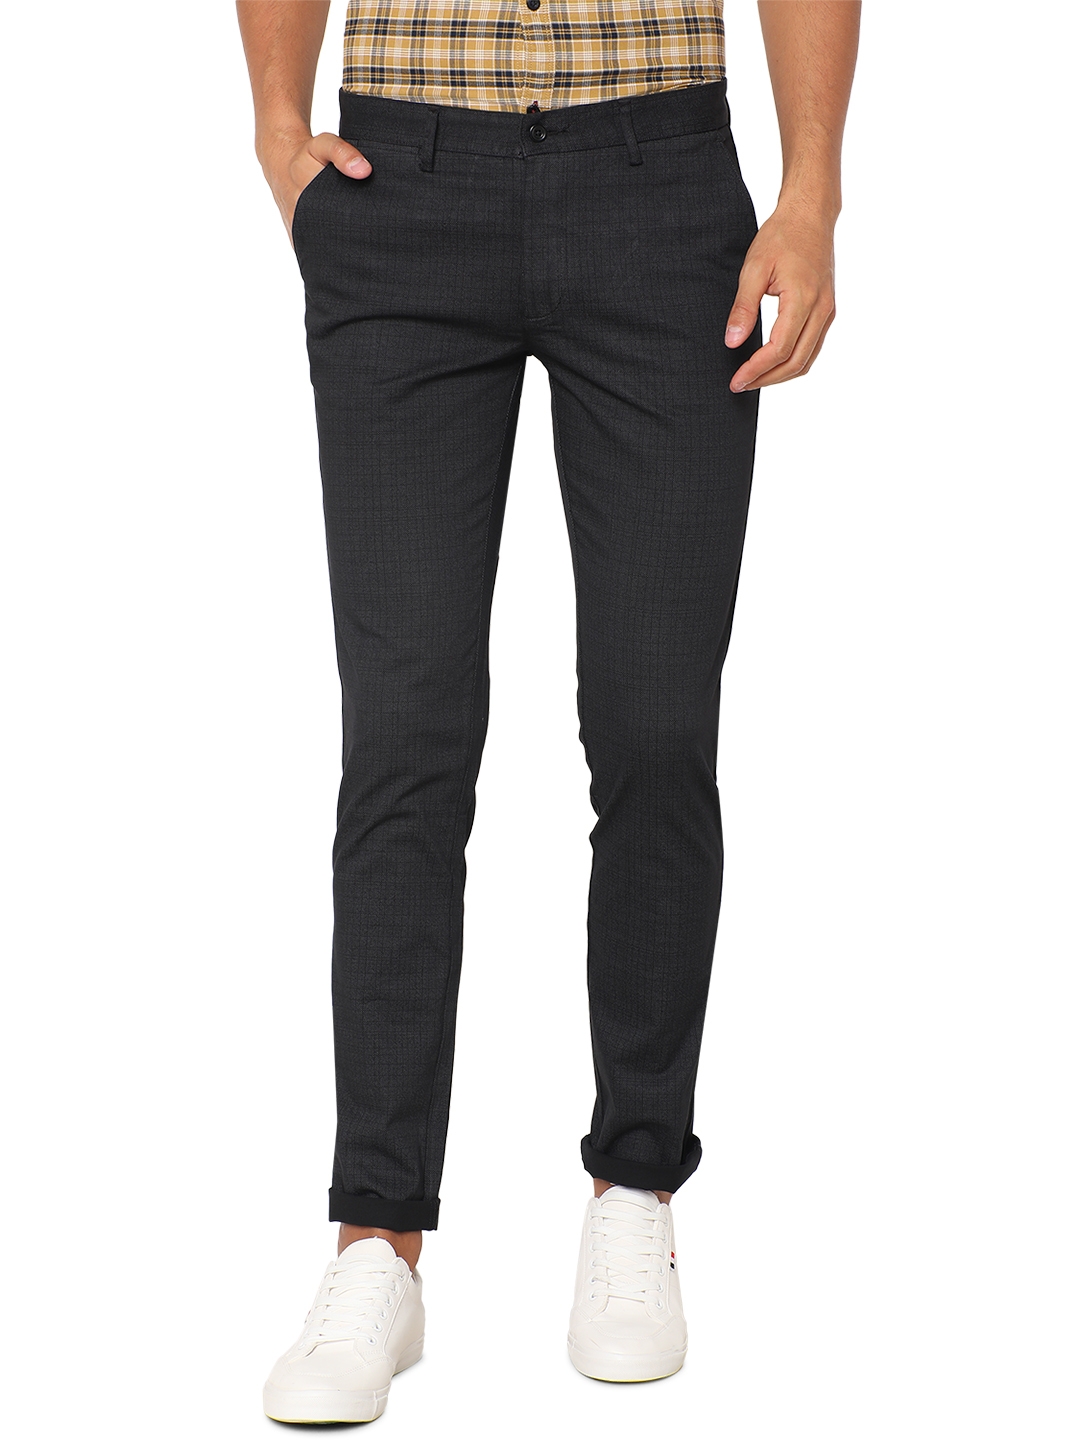 Black Checked Super Slim Fit Casual Trouser | Greenfibre